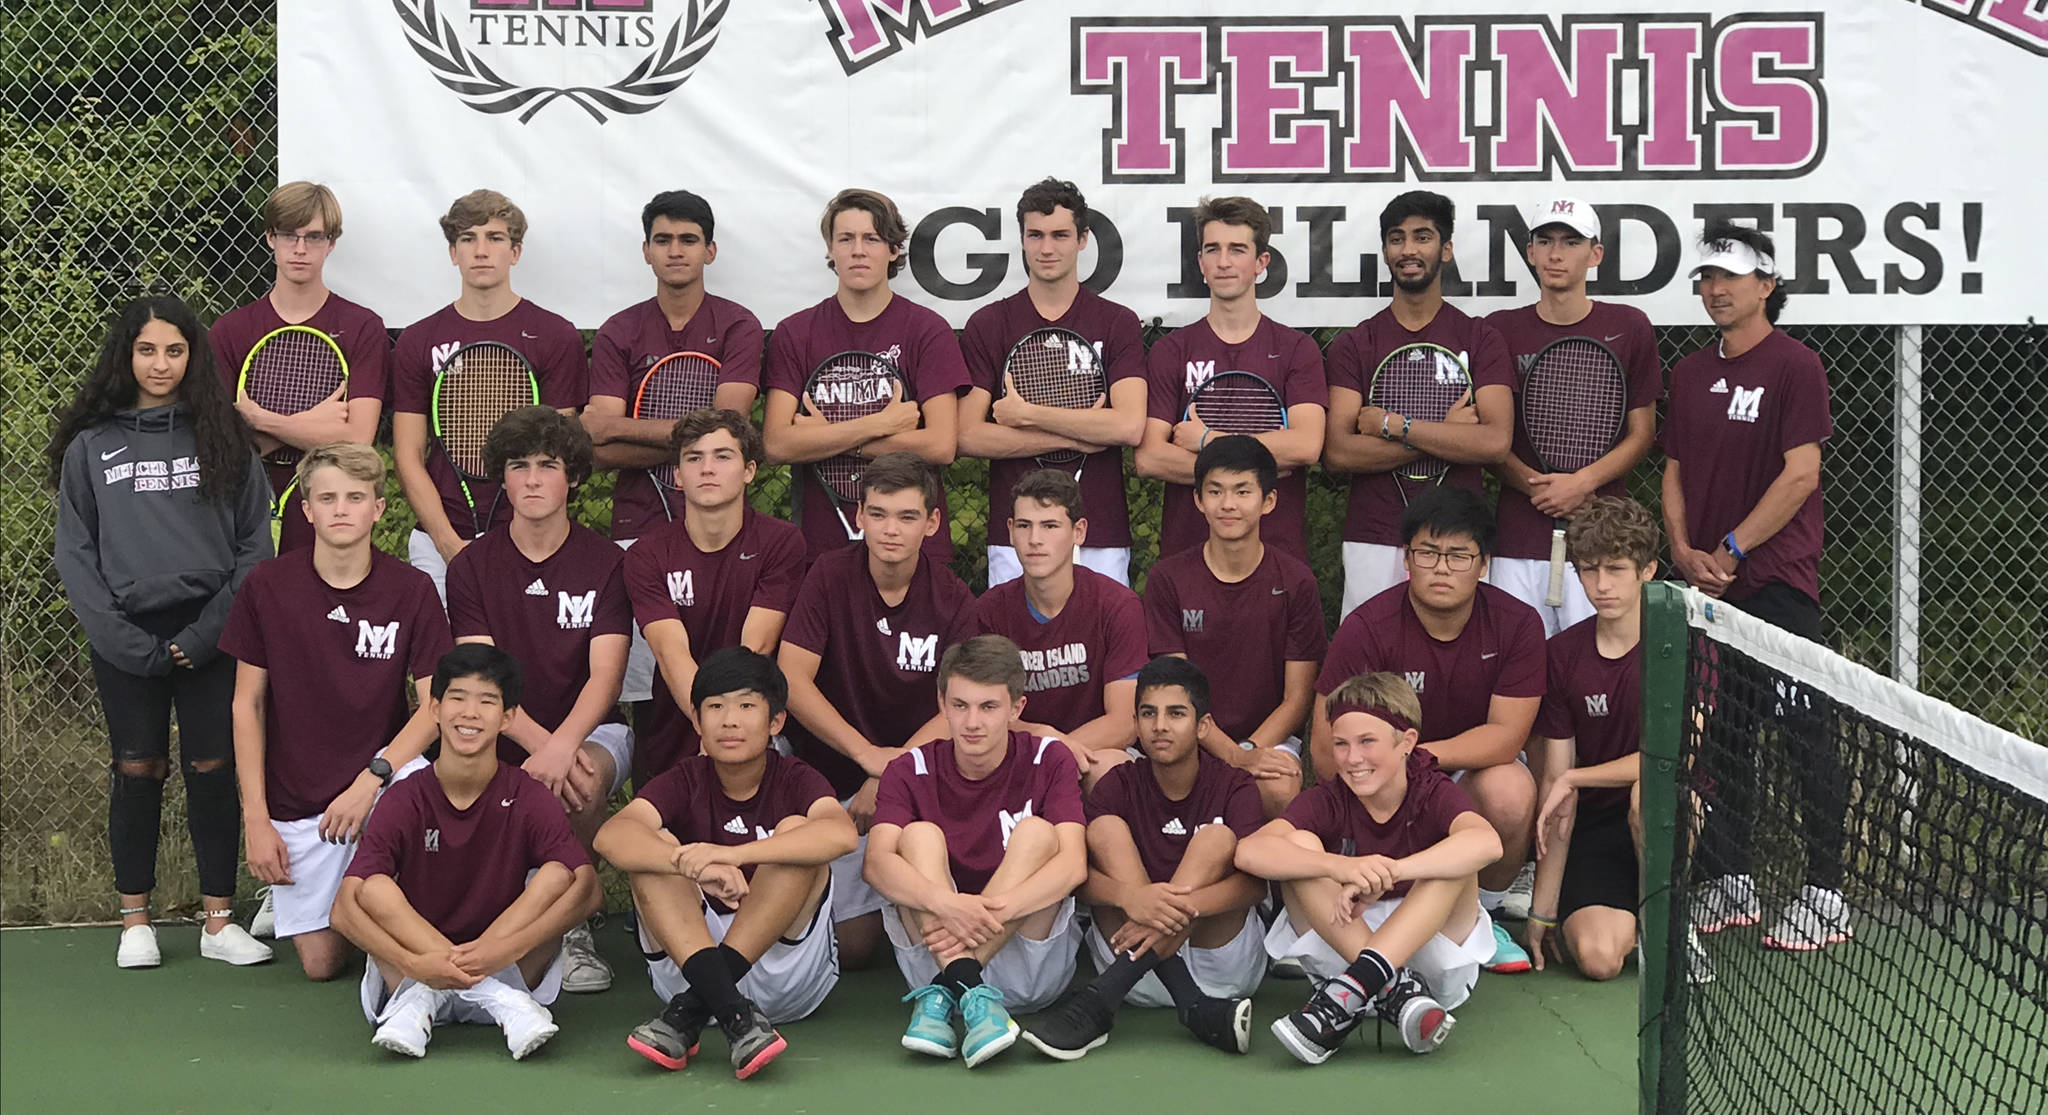 The Mercer Island boys tennis team picked up their third win of the season, a 7-0 victory against Juanita, on Thursday, Sept. 19. Photo courtesy of Anjali Patel